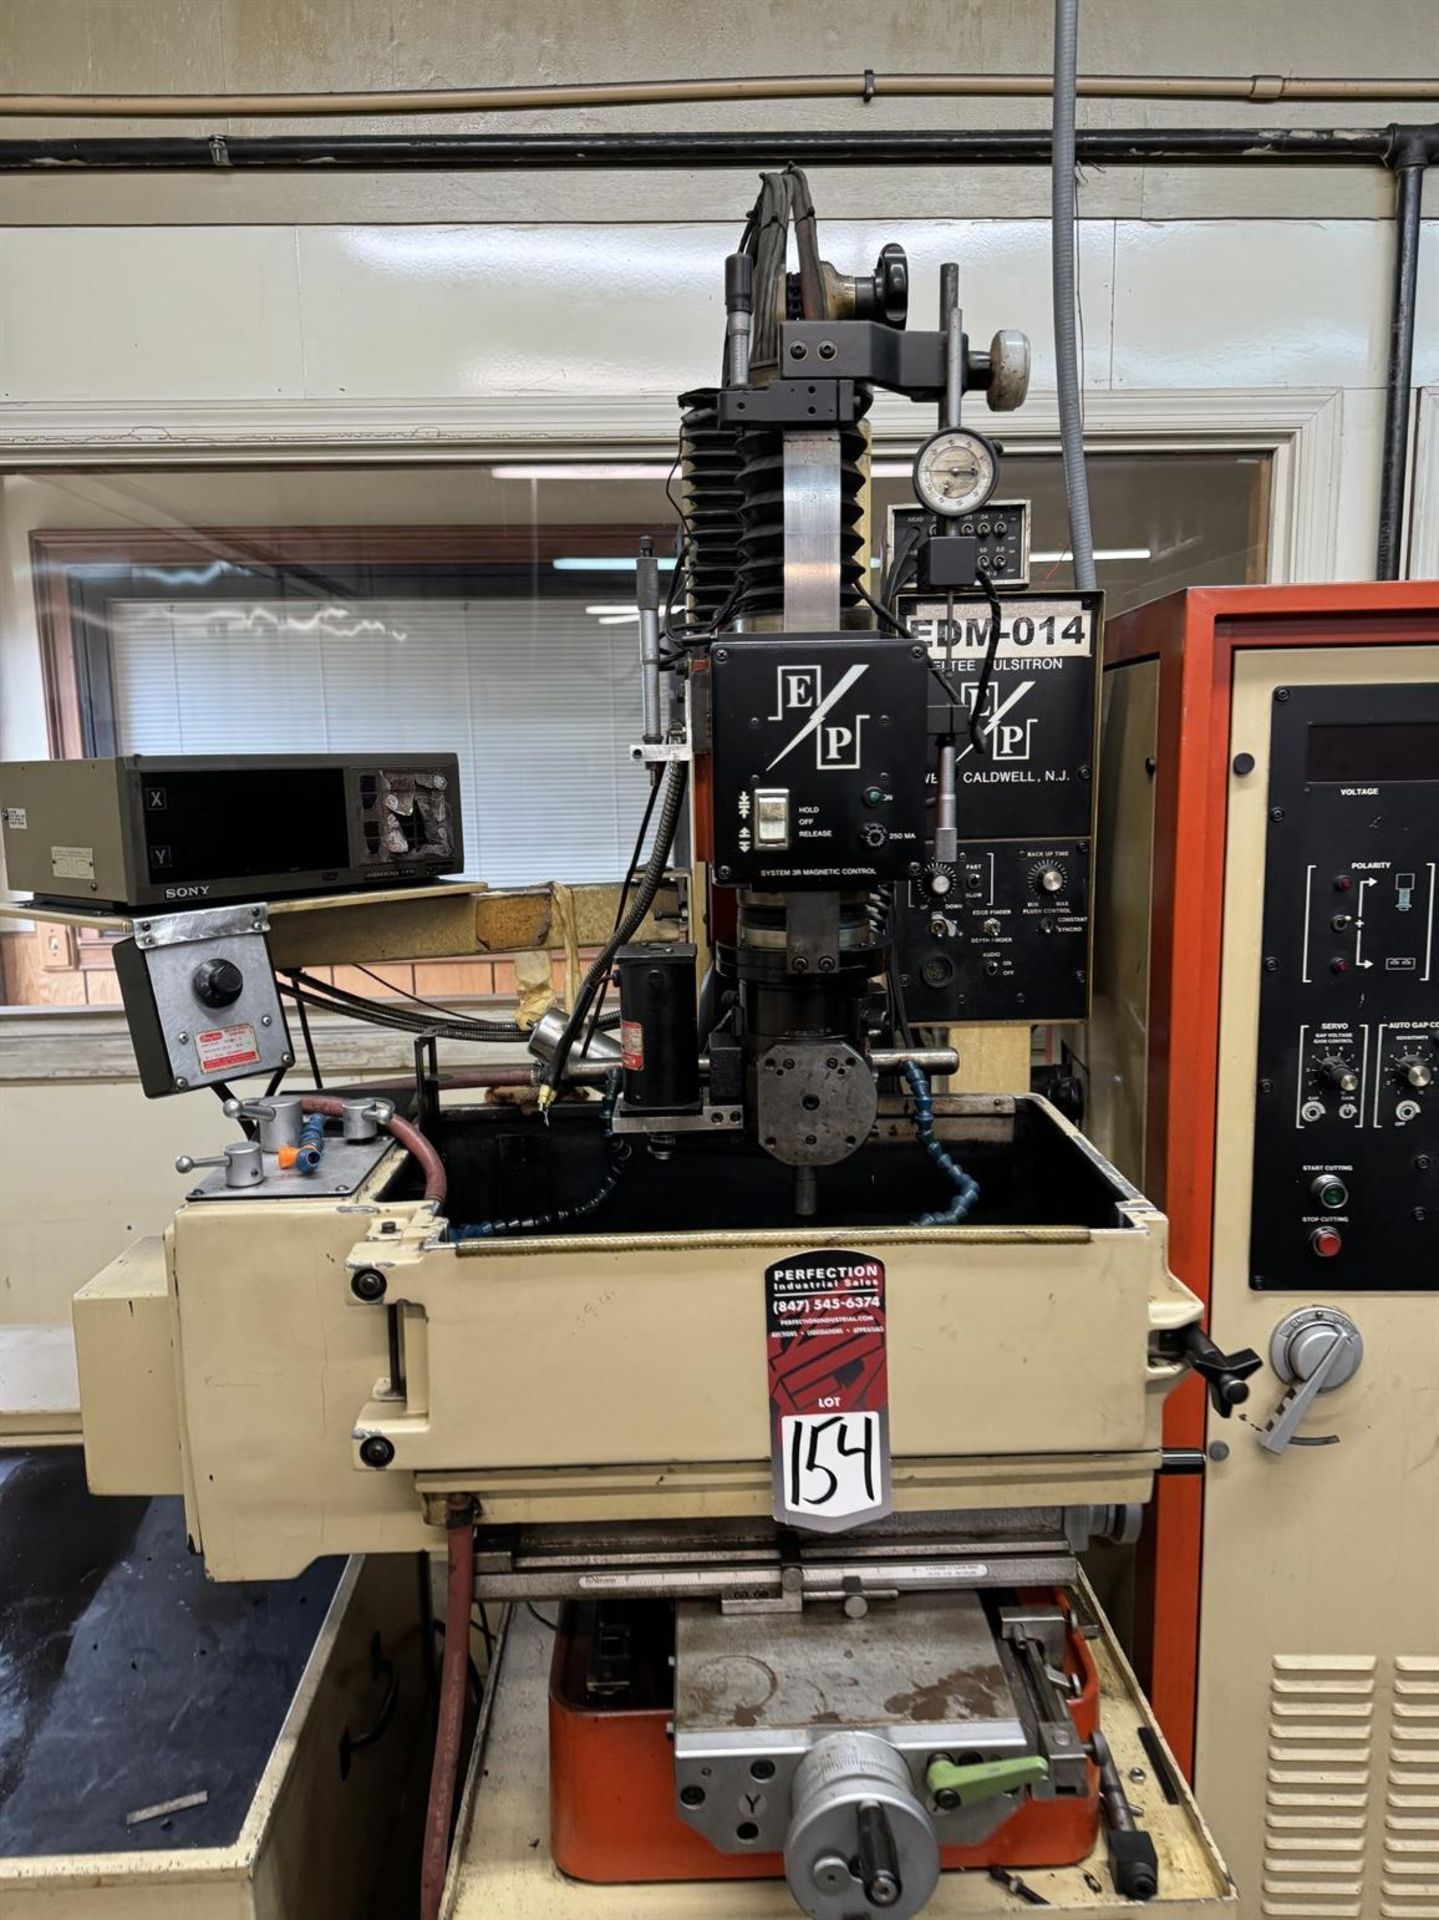 ELTEE PULSITRON TR20 Sinker Type EDM, s/n EP30/RDP Control, Sony Magnescale LH10 2-Axis DRO (Machine - Image 3 of 7